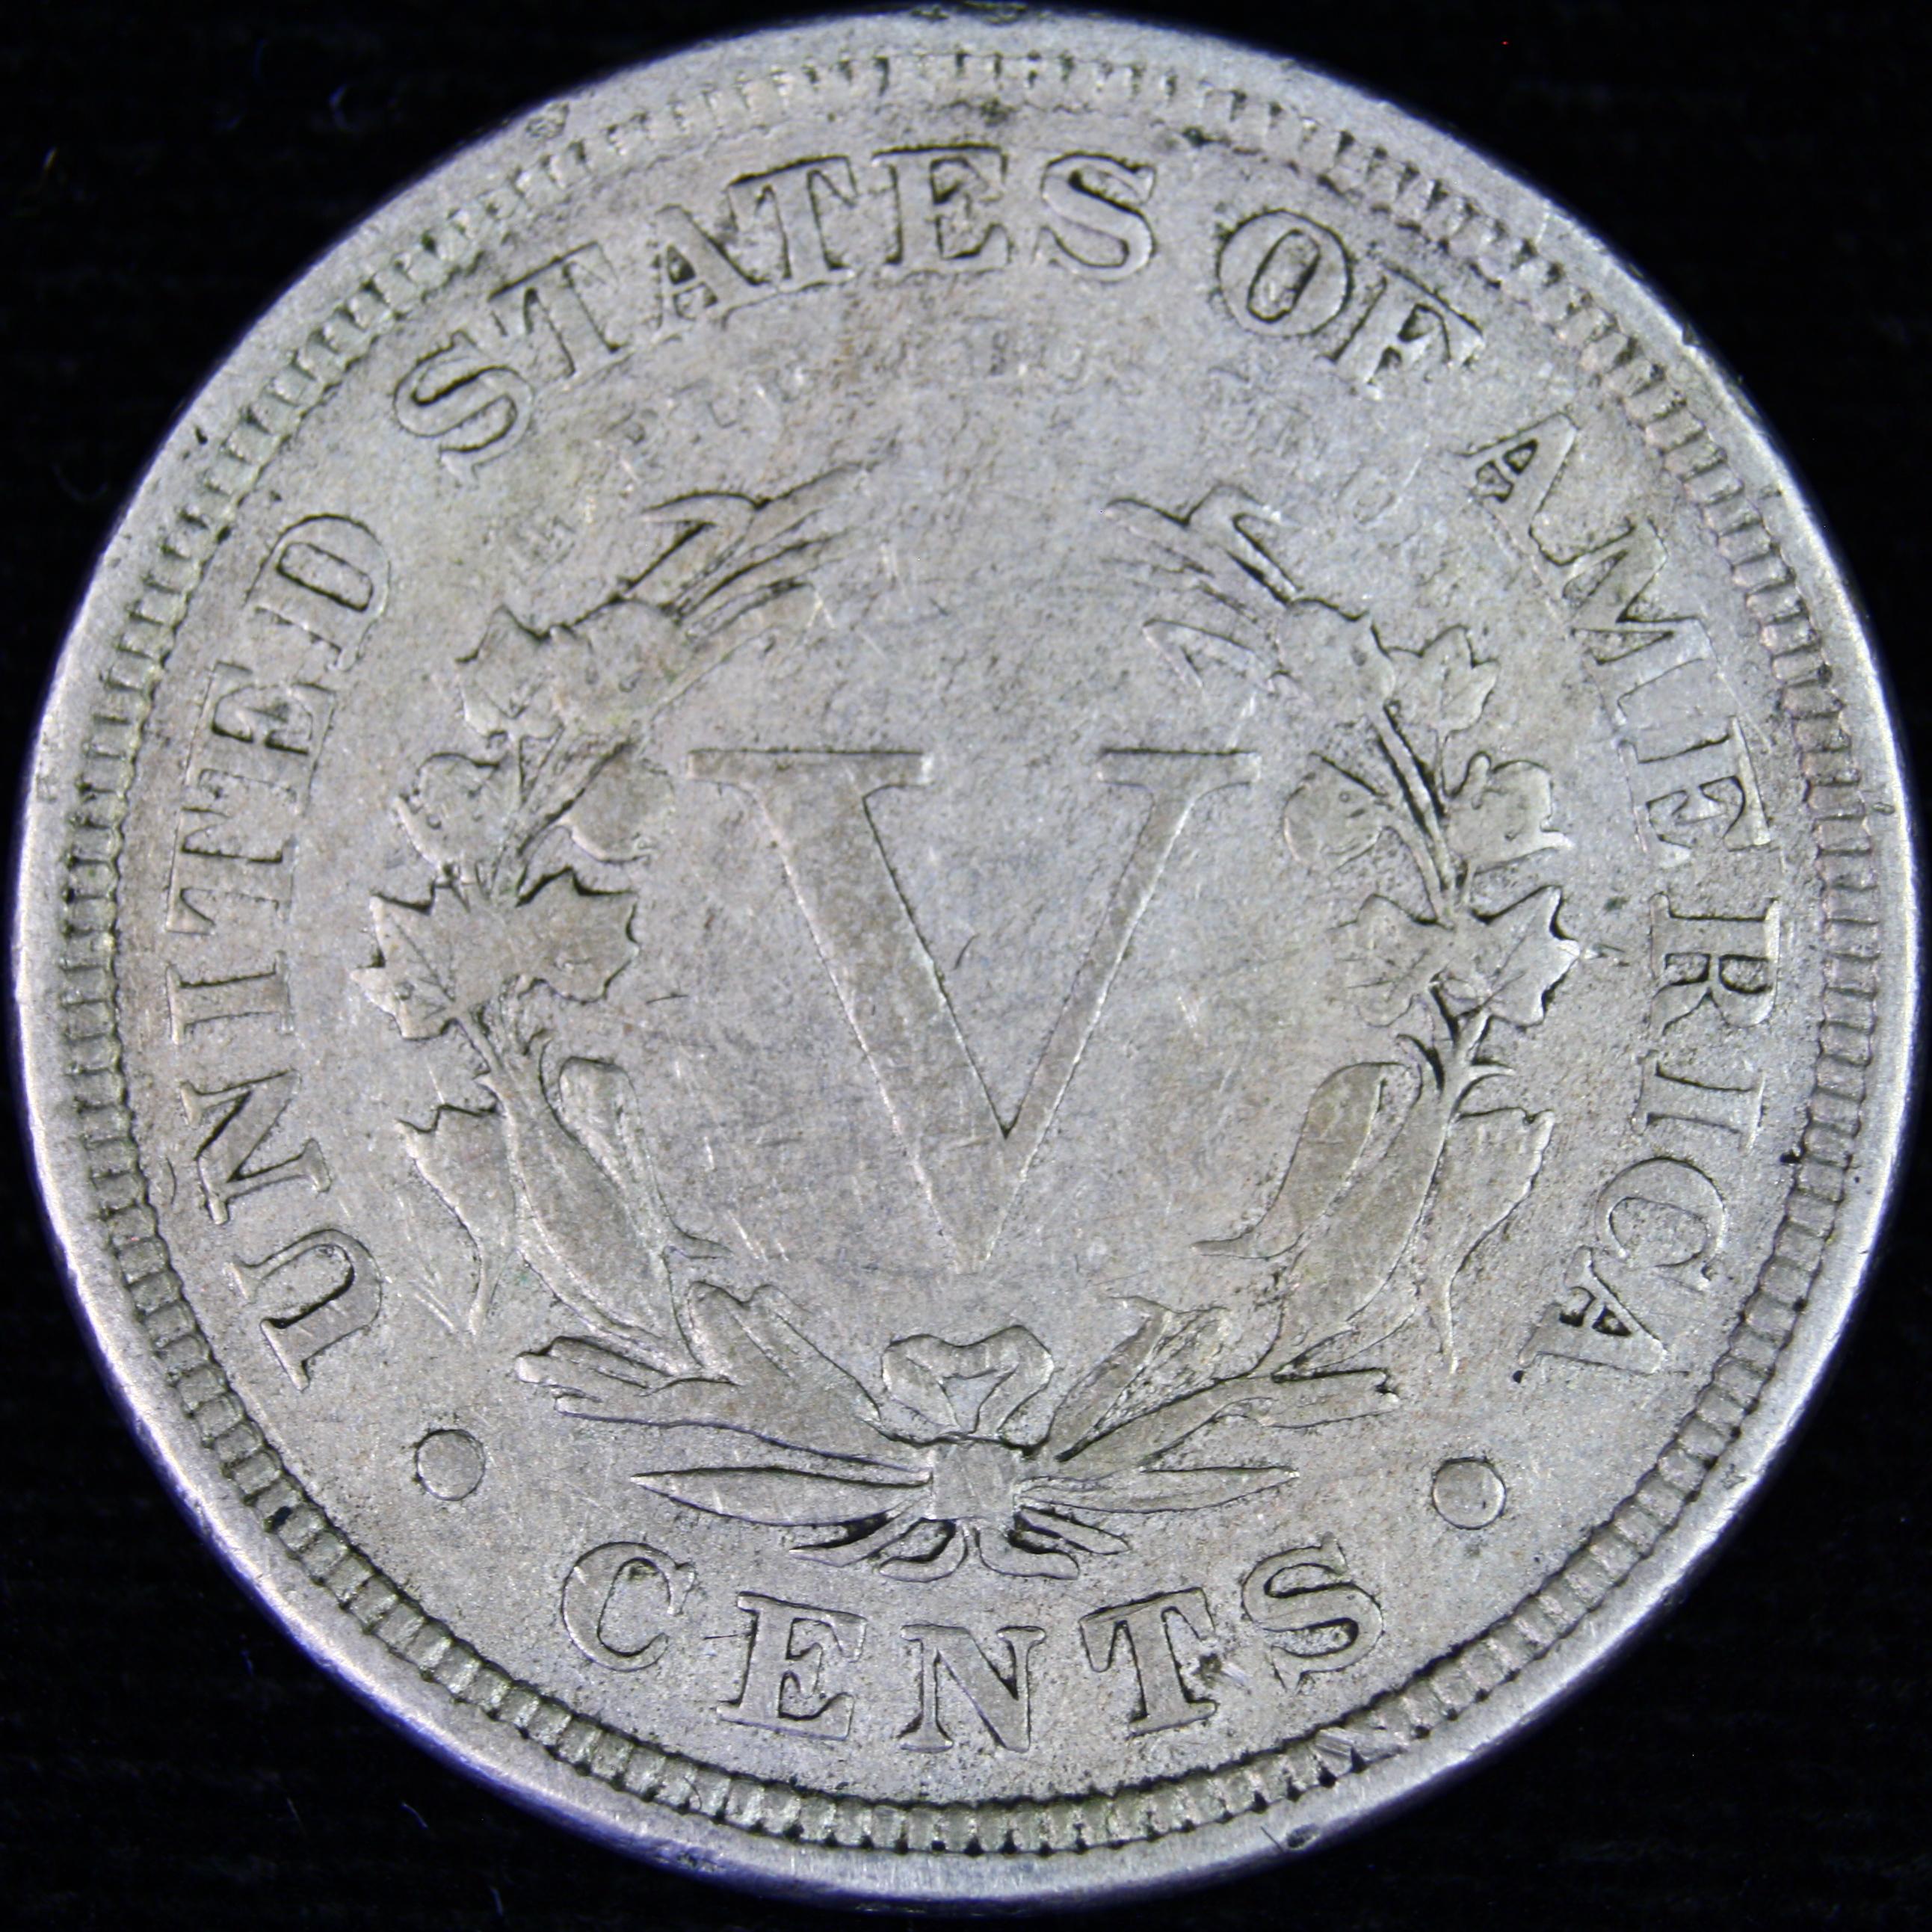 1883 with cents U.S. "V" nickel